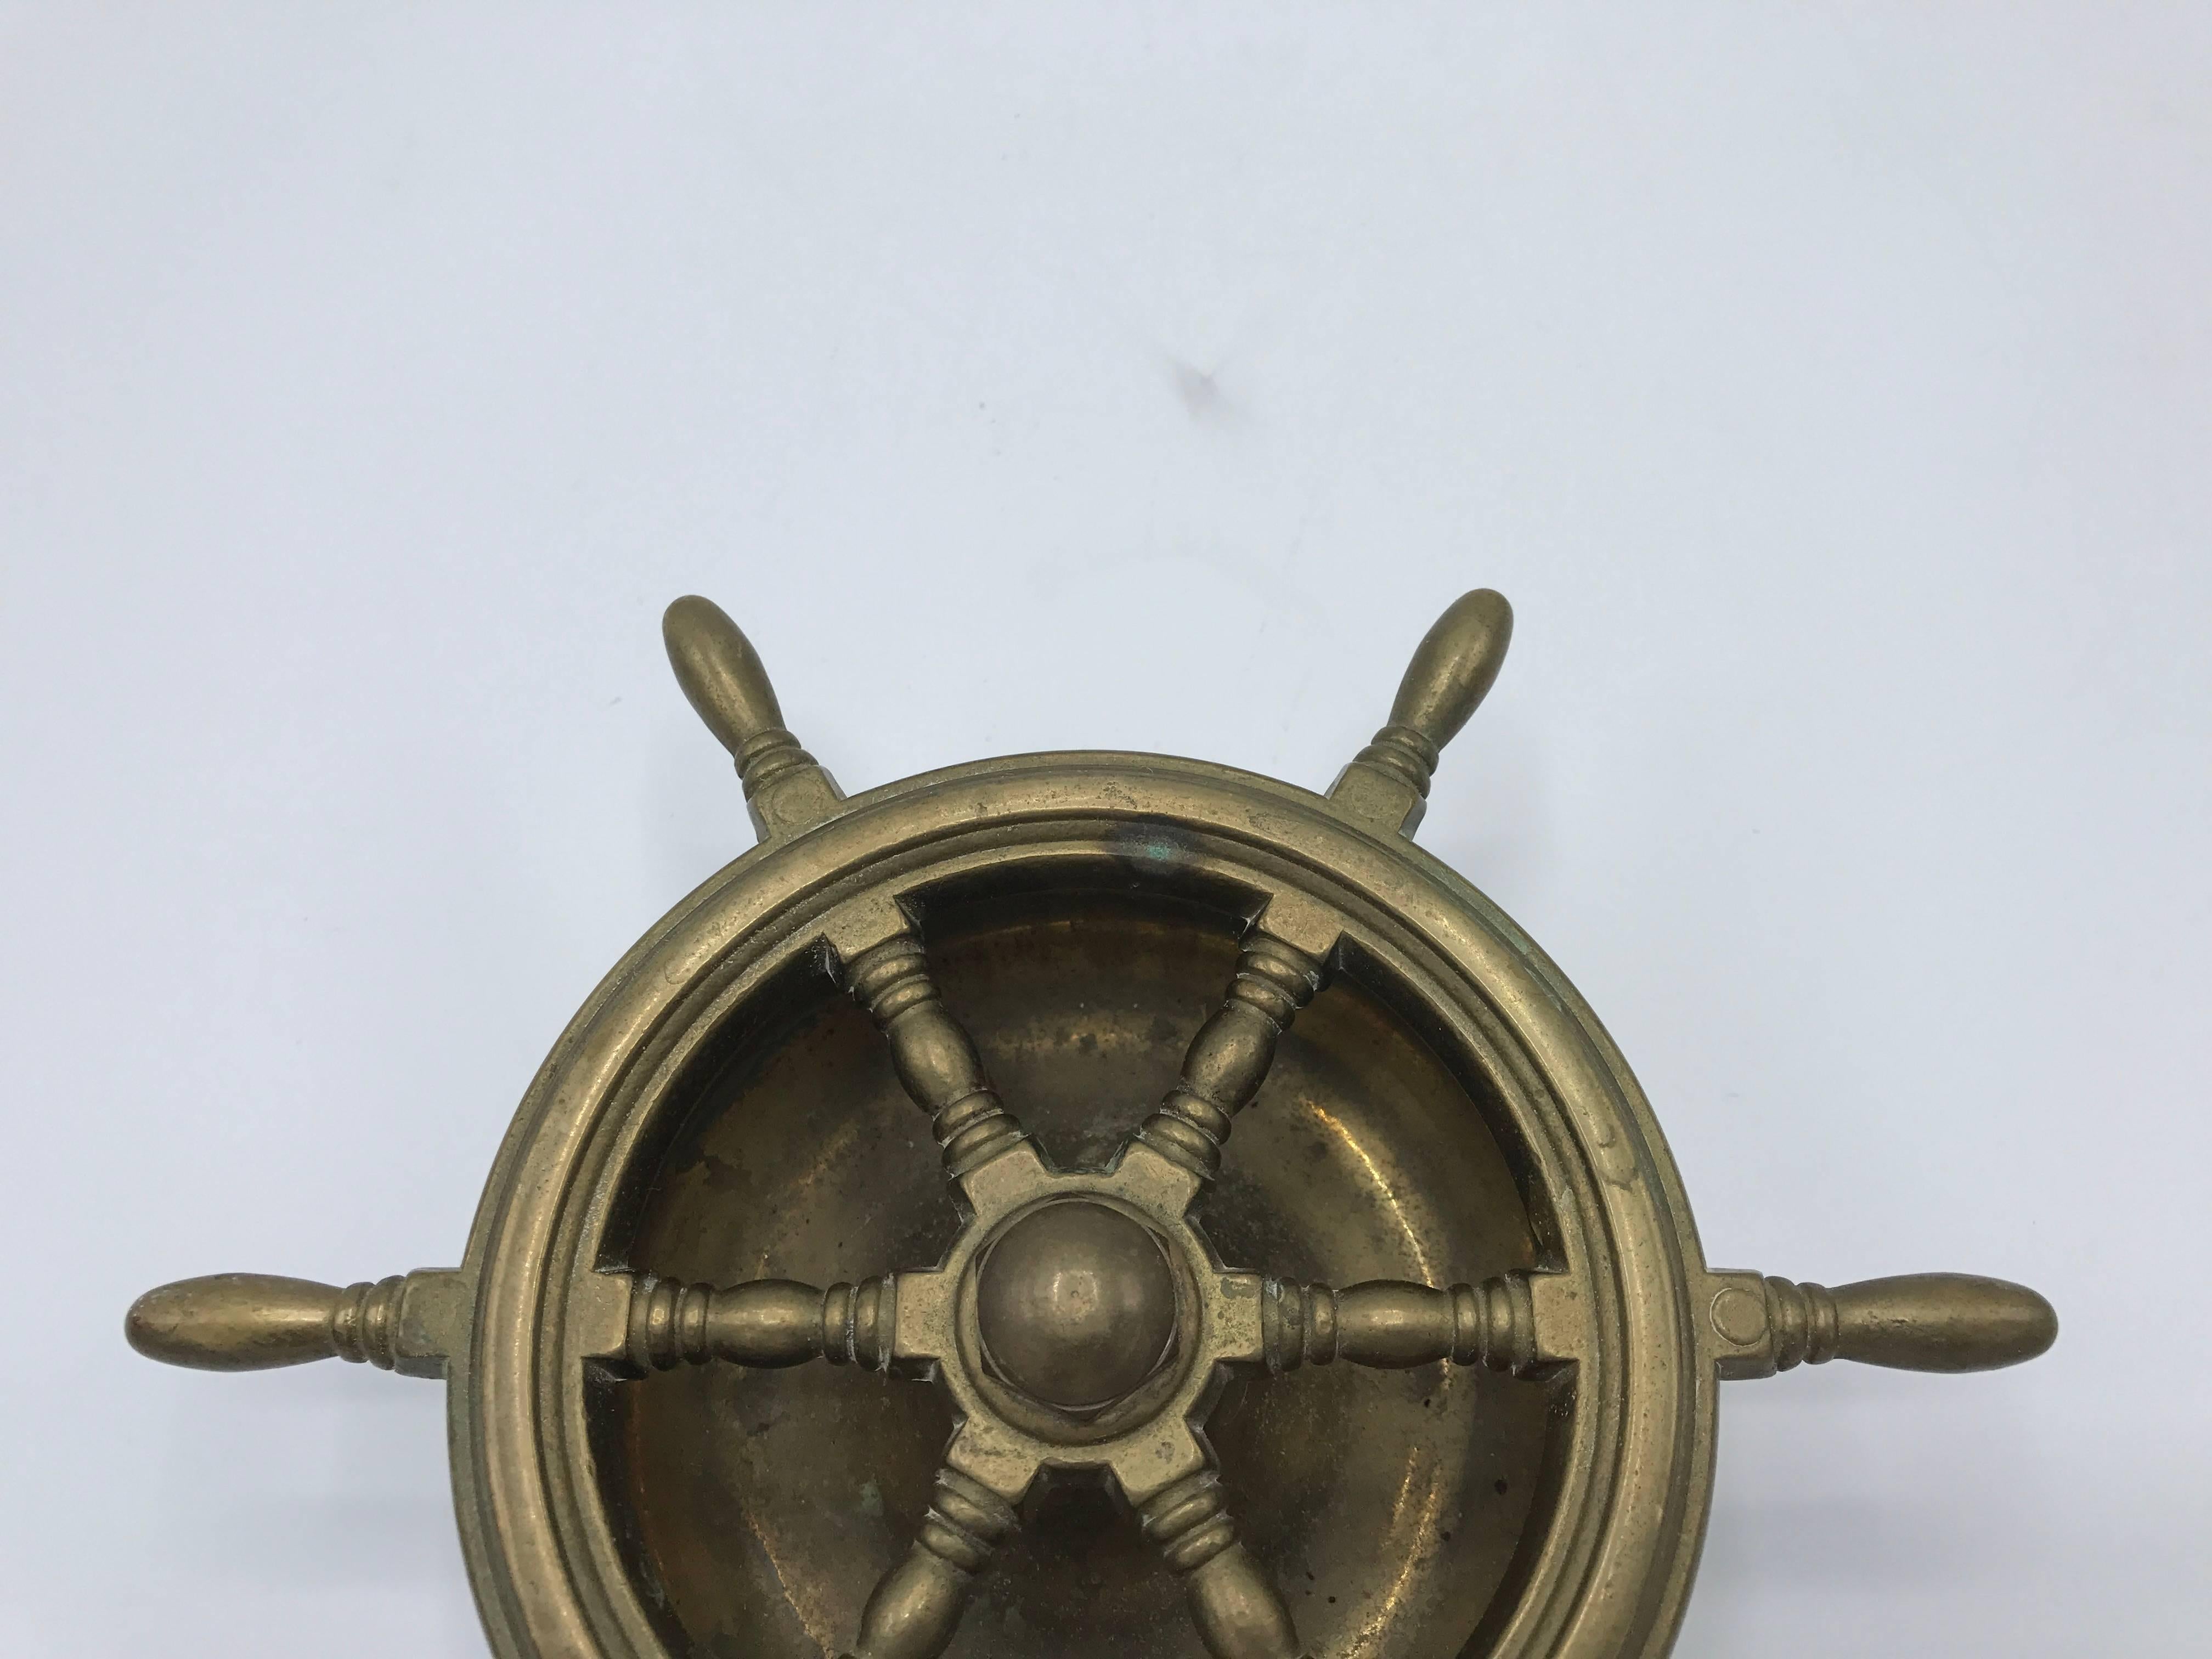 Offered is a gorgeous, 1950s Italian brass nautical ship wheel ashtray. Rubber bumper on the underside, easy grip to surfaces. Heavy. Marked: Italy.